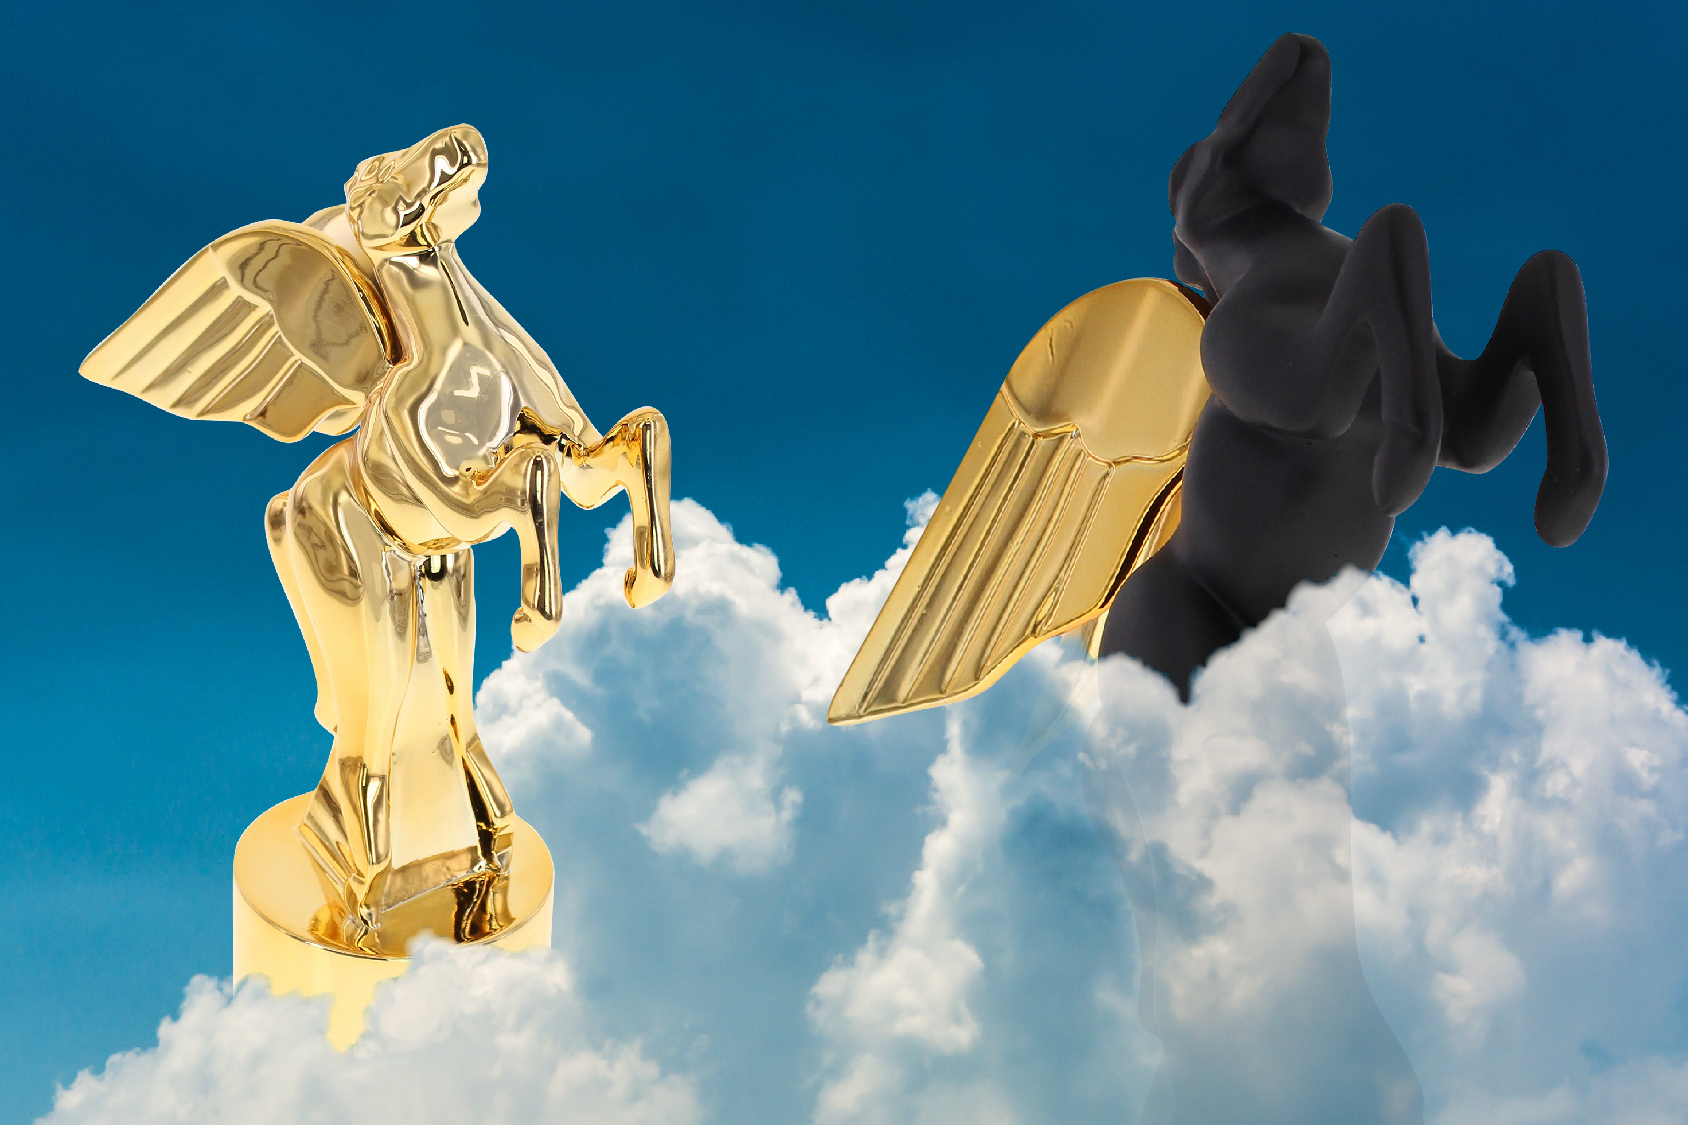 Two pegasus shaped custom awards emerging from clouds